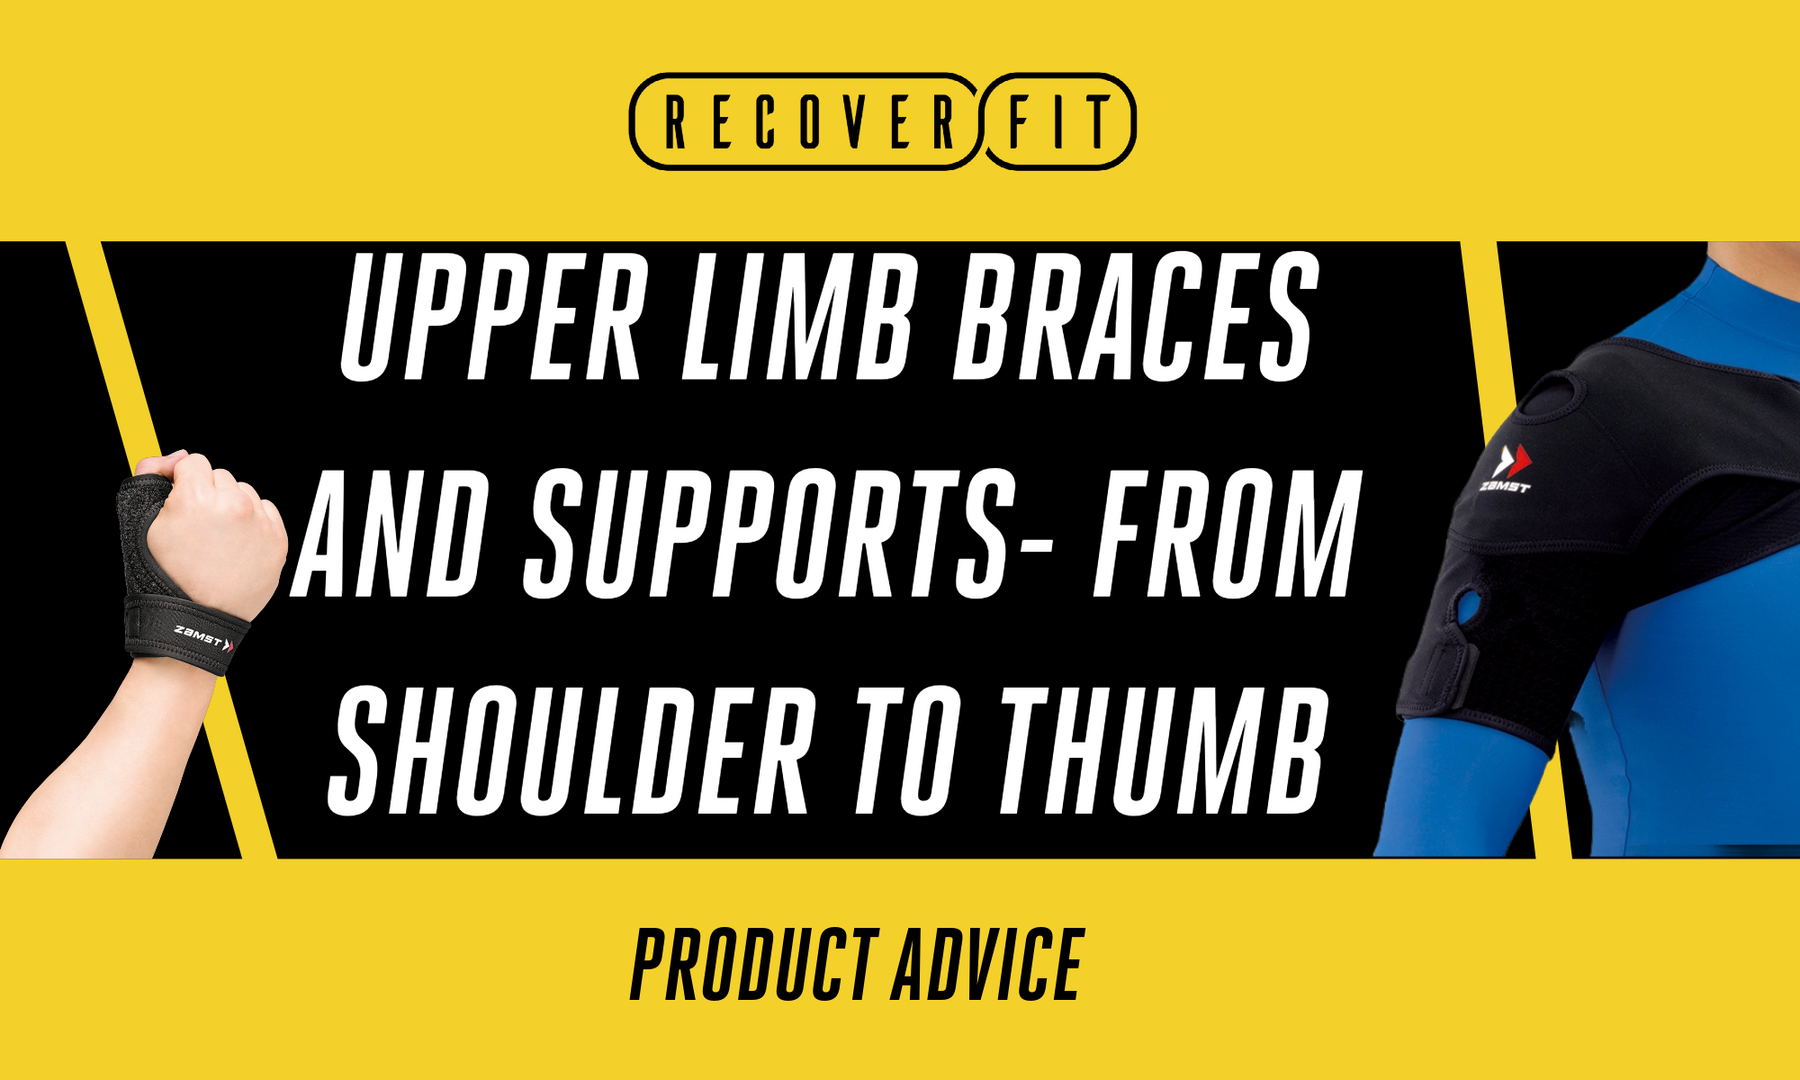 Upper Limb Braces and Supports- From Shoulder to Thumb